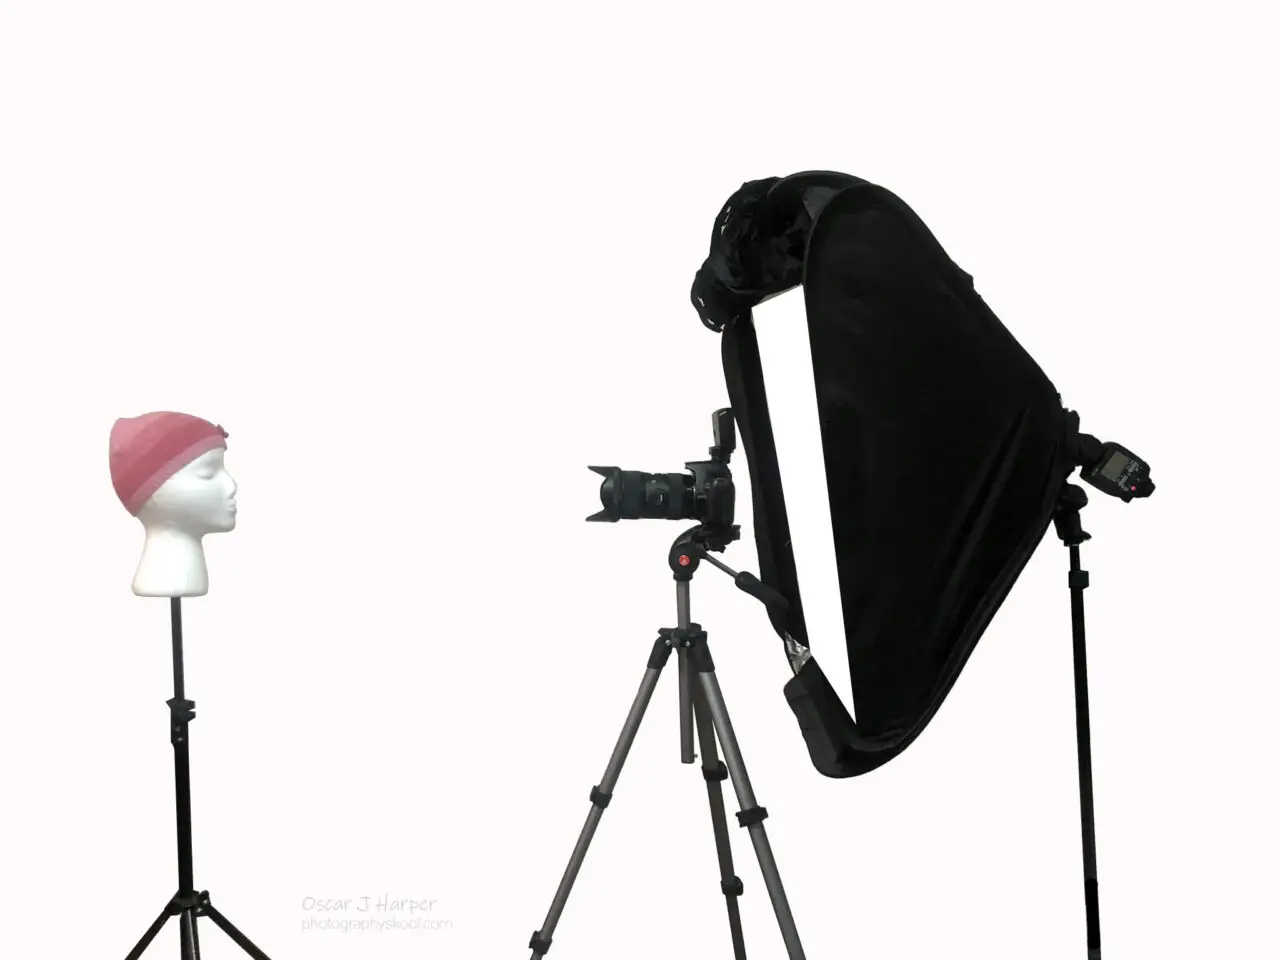 Polystyrene head on a stand, camera and radio trigger on a tripod and a large square softbox on a stand.